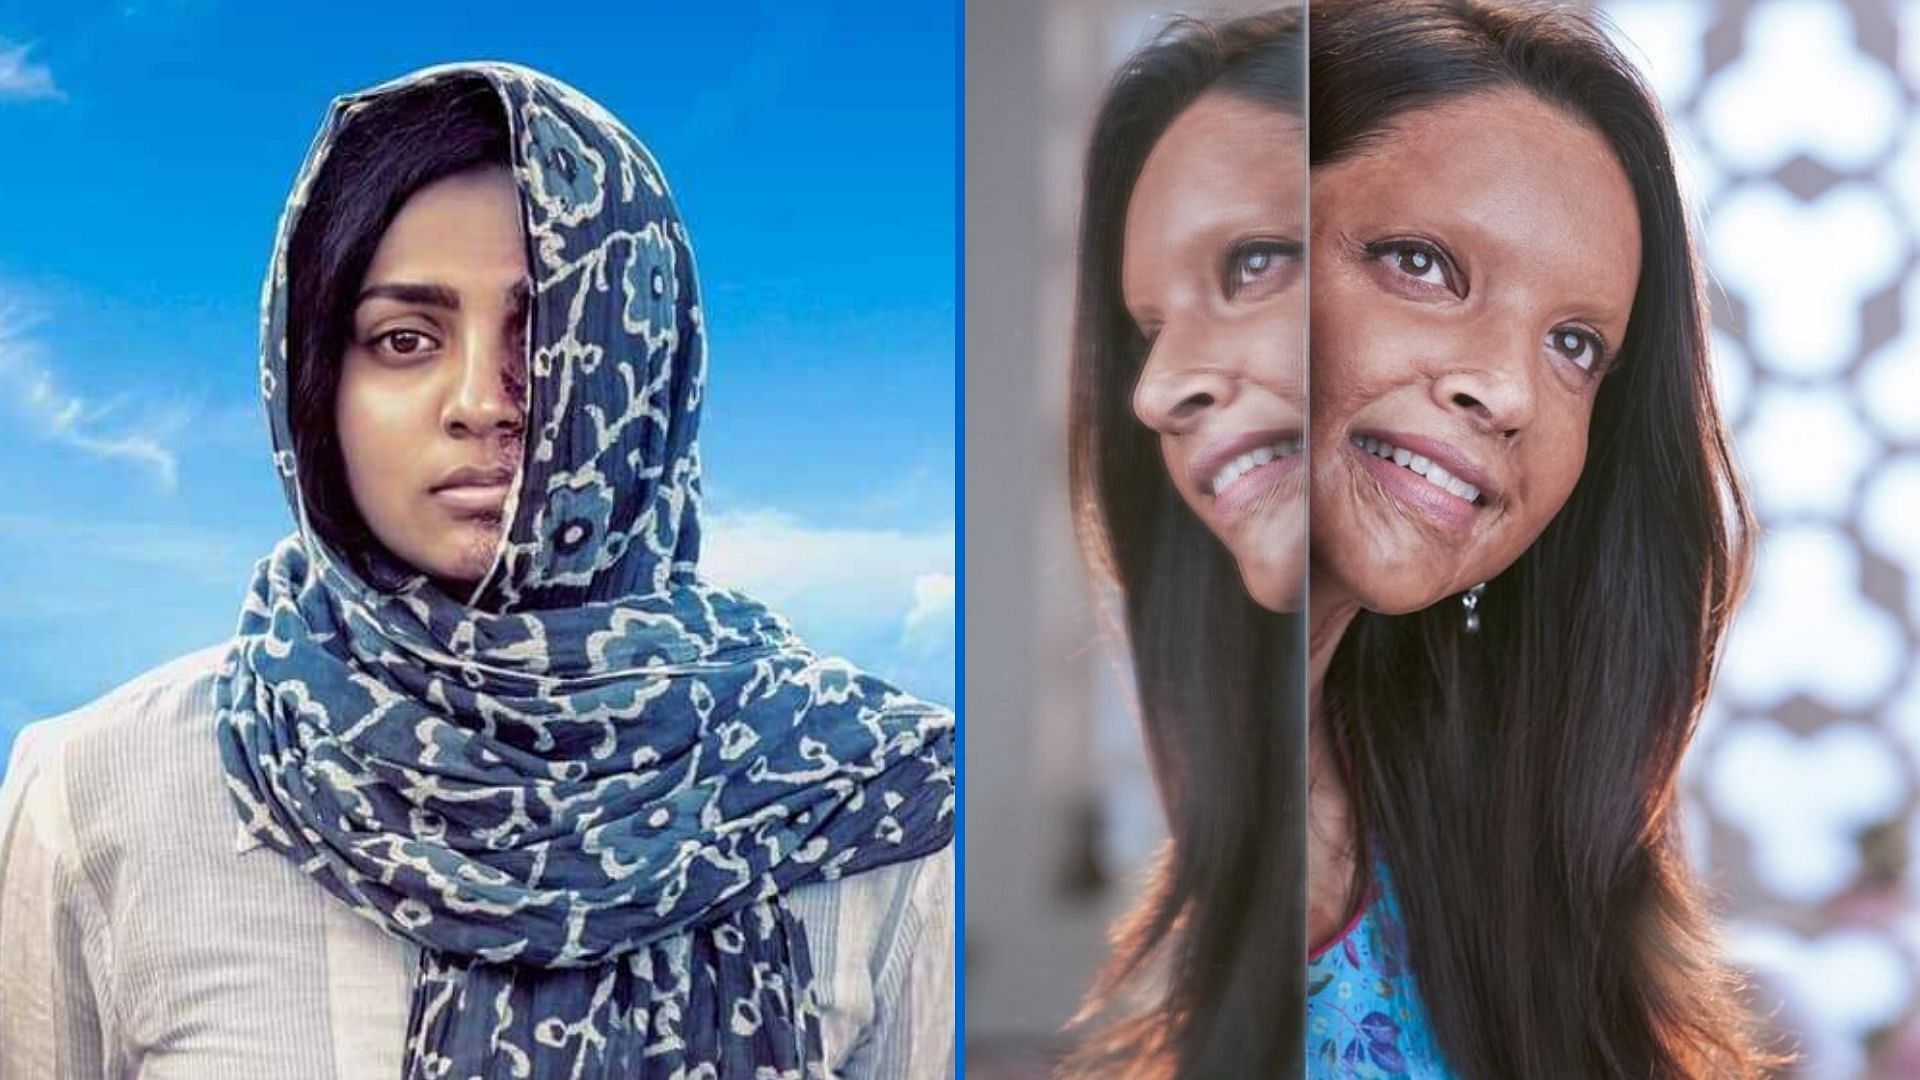 Parvathy and Deepika in posters for <i>Uyare </i>and <i>Chhapaak</i>, respectively.